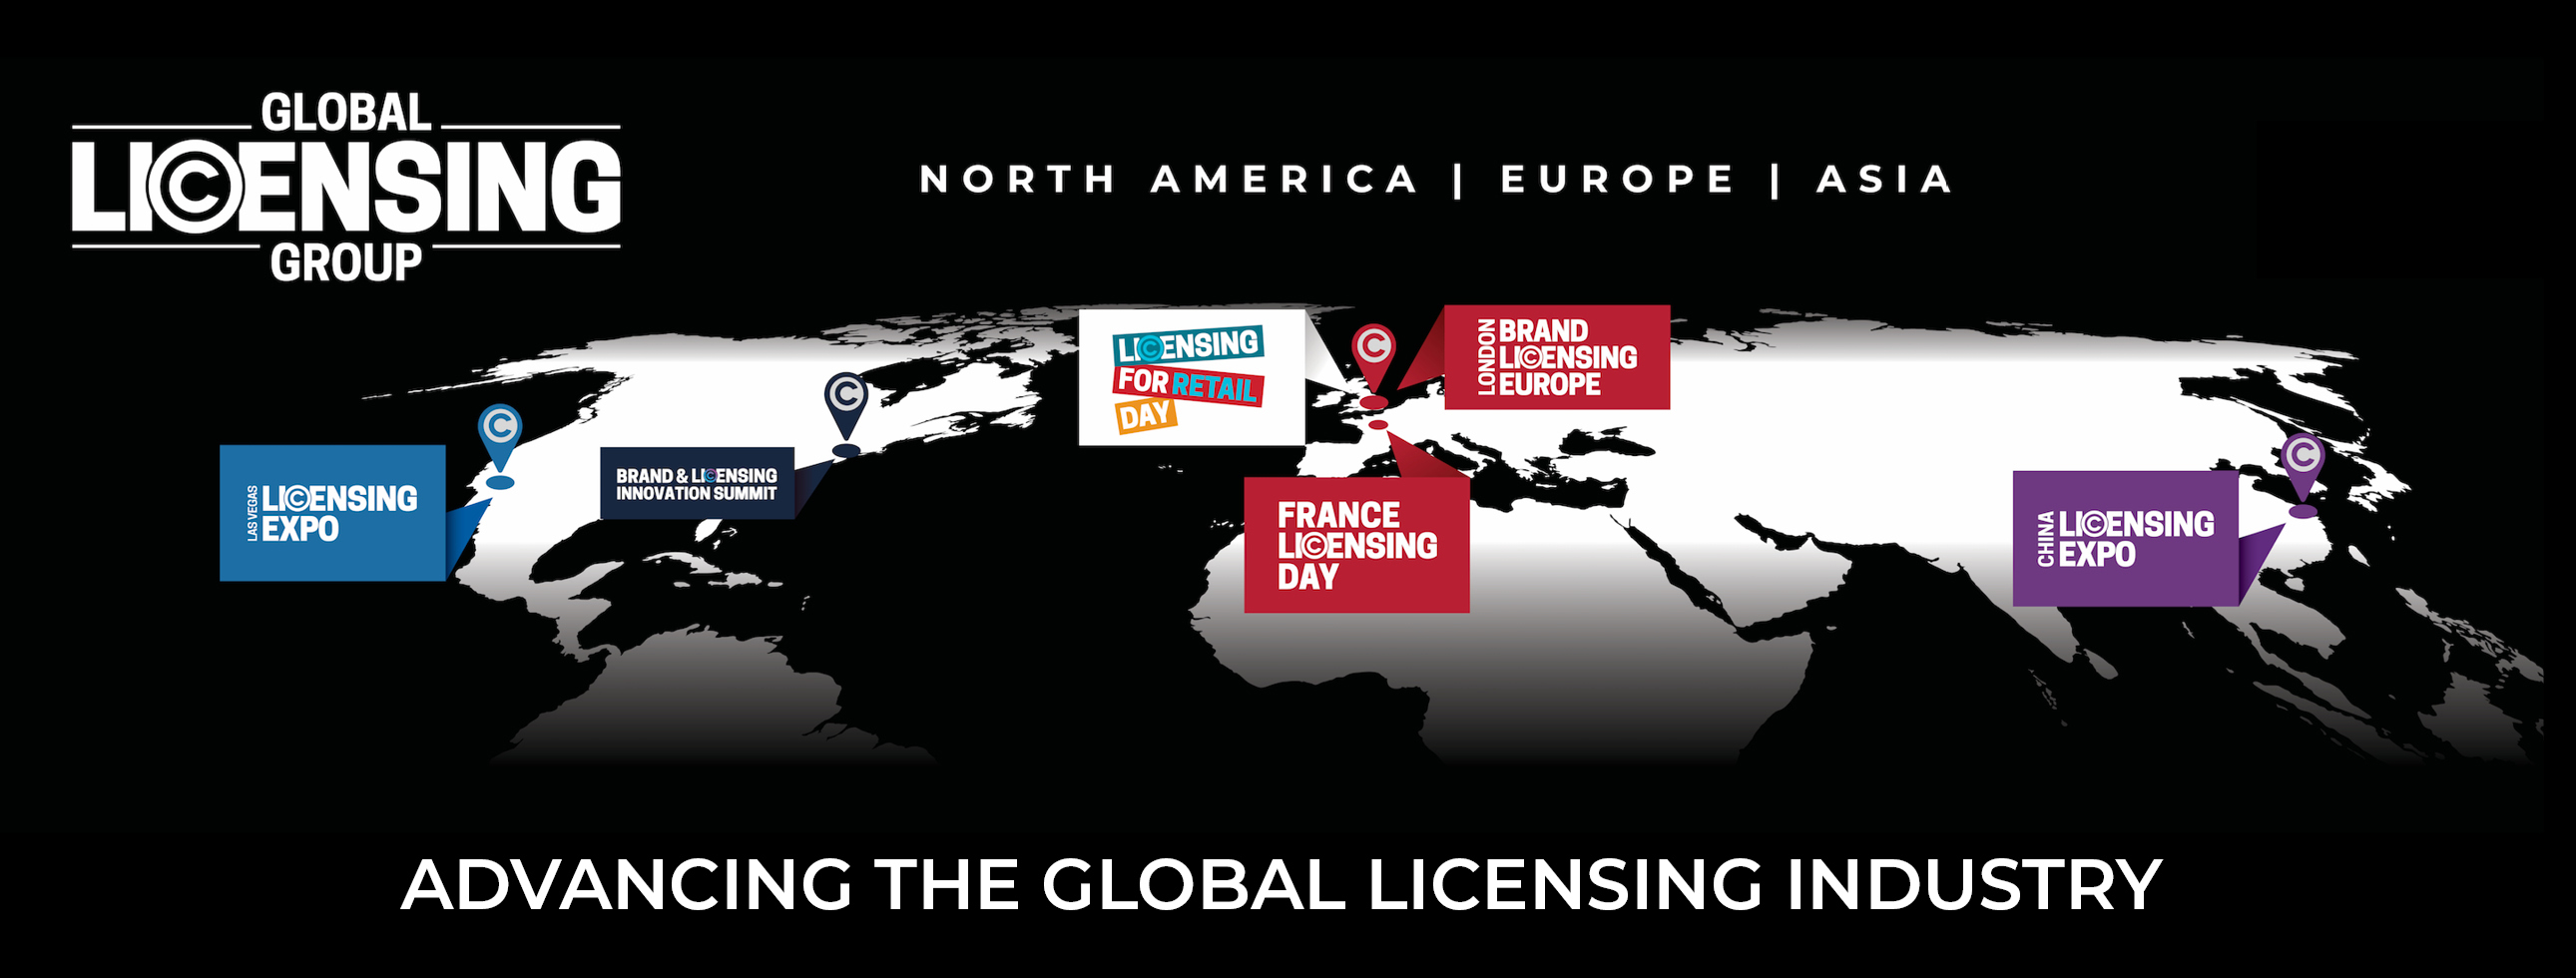 INFORMA MARKETS - GLOBAL LICENSING GROUP (Licensing Expo), Monday, June 5, 2023, Press release picture